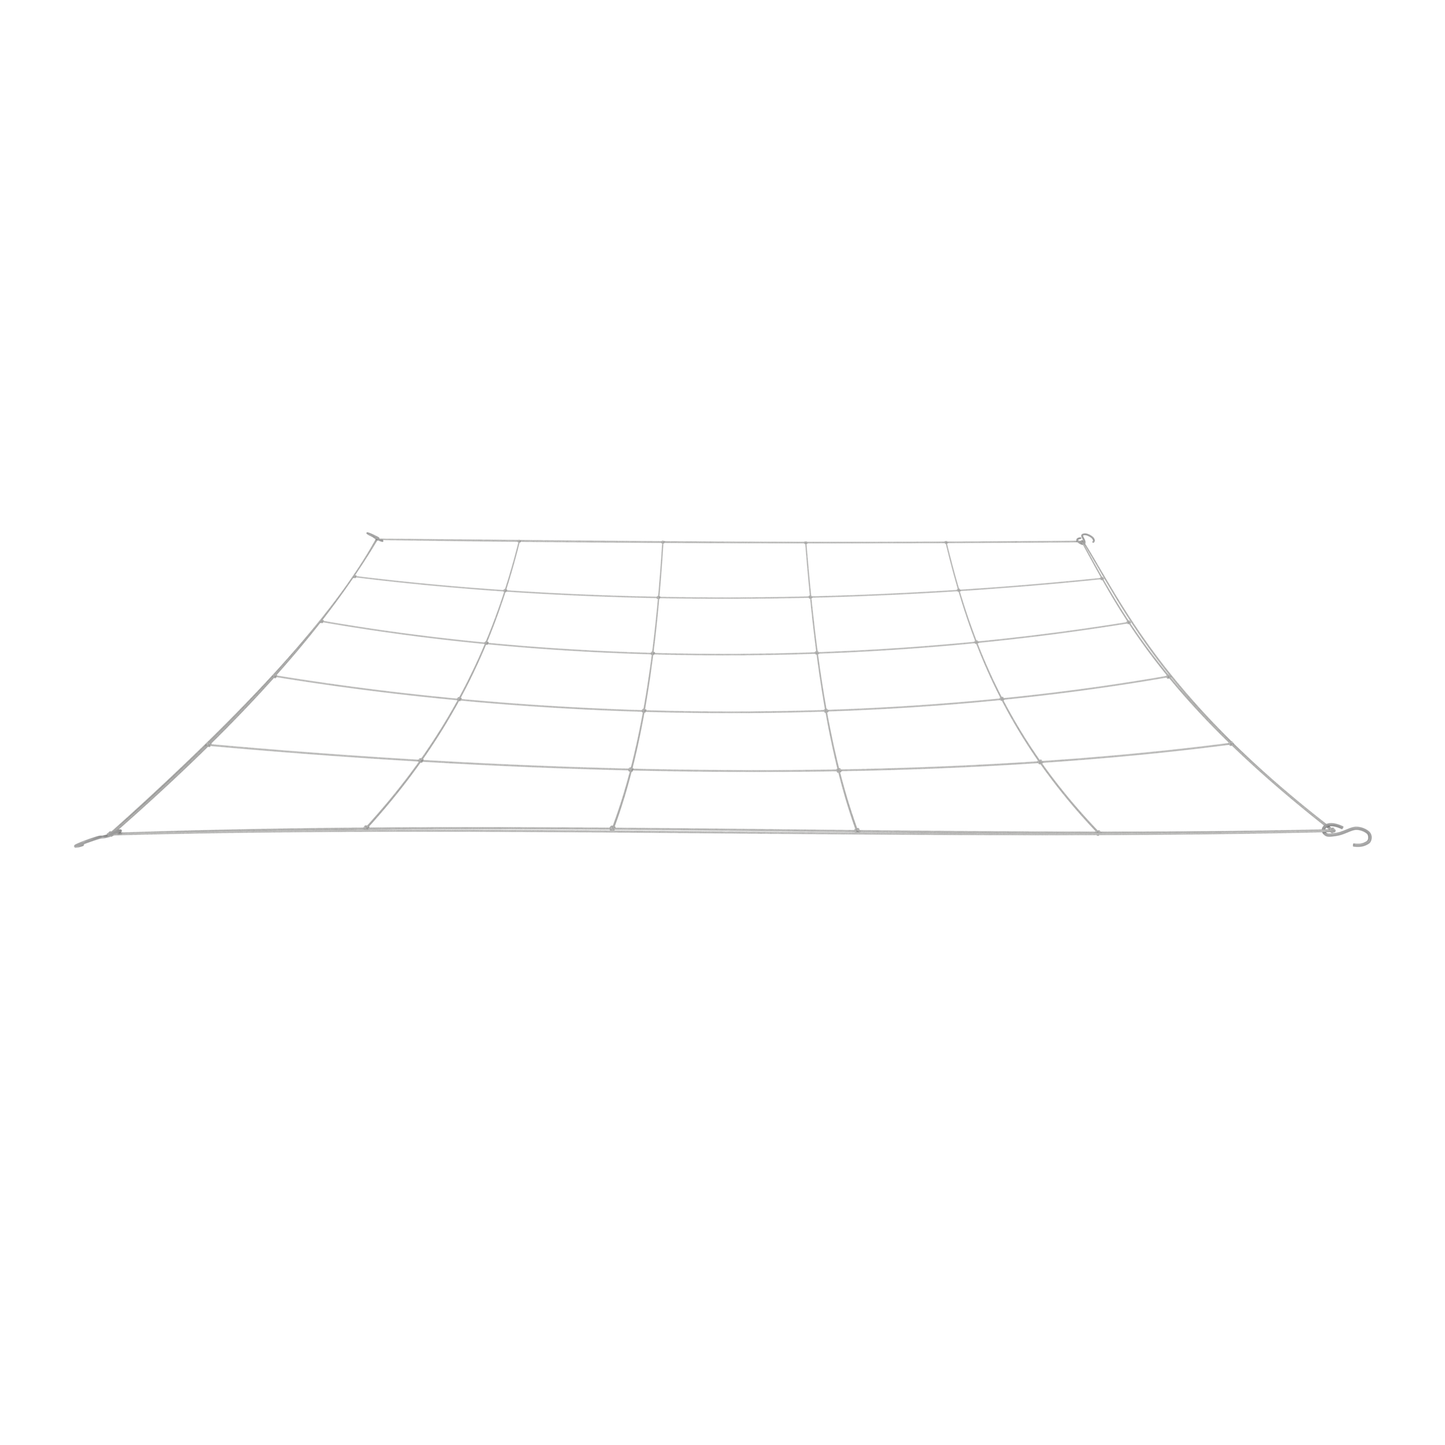 single 6" mesh flexible grow tent scrog net. Fits sizes 5x5 and under.